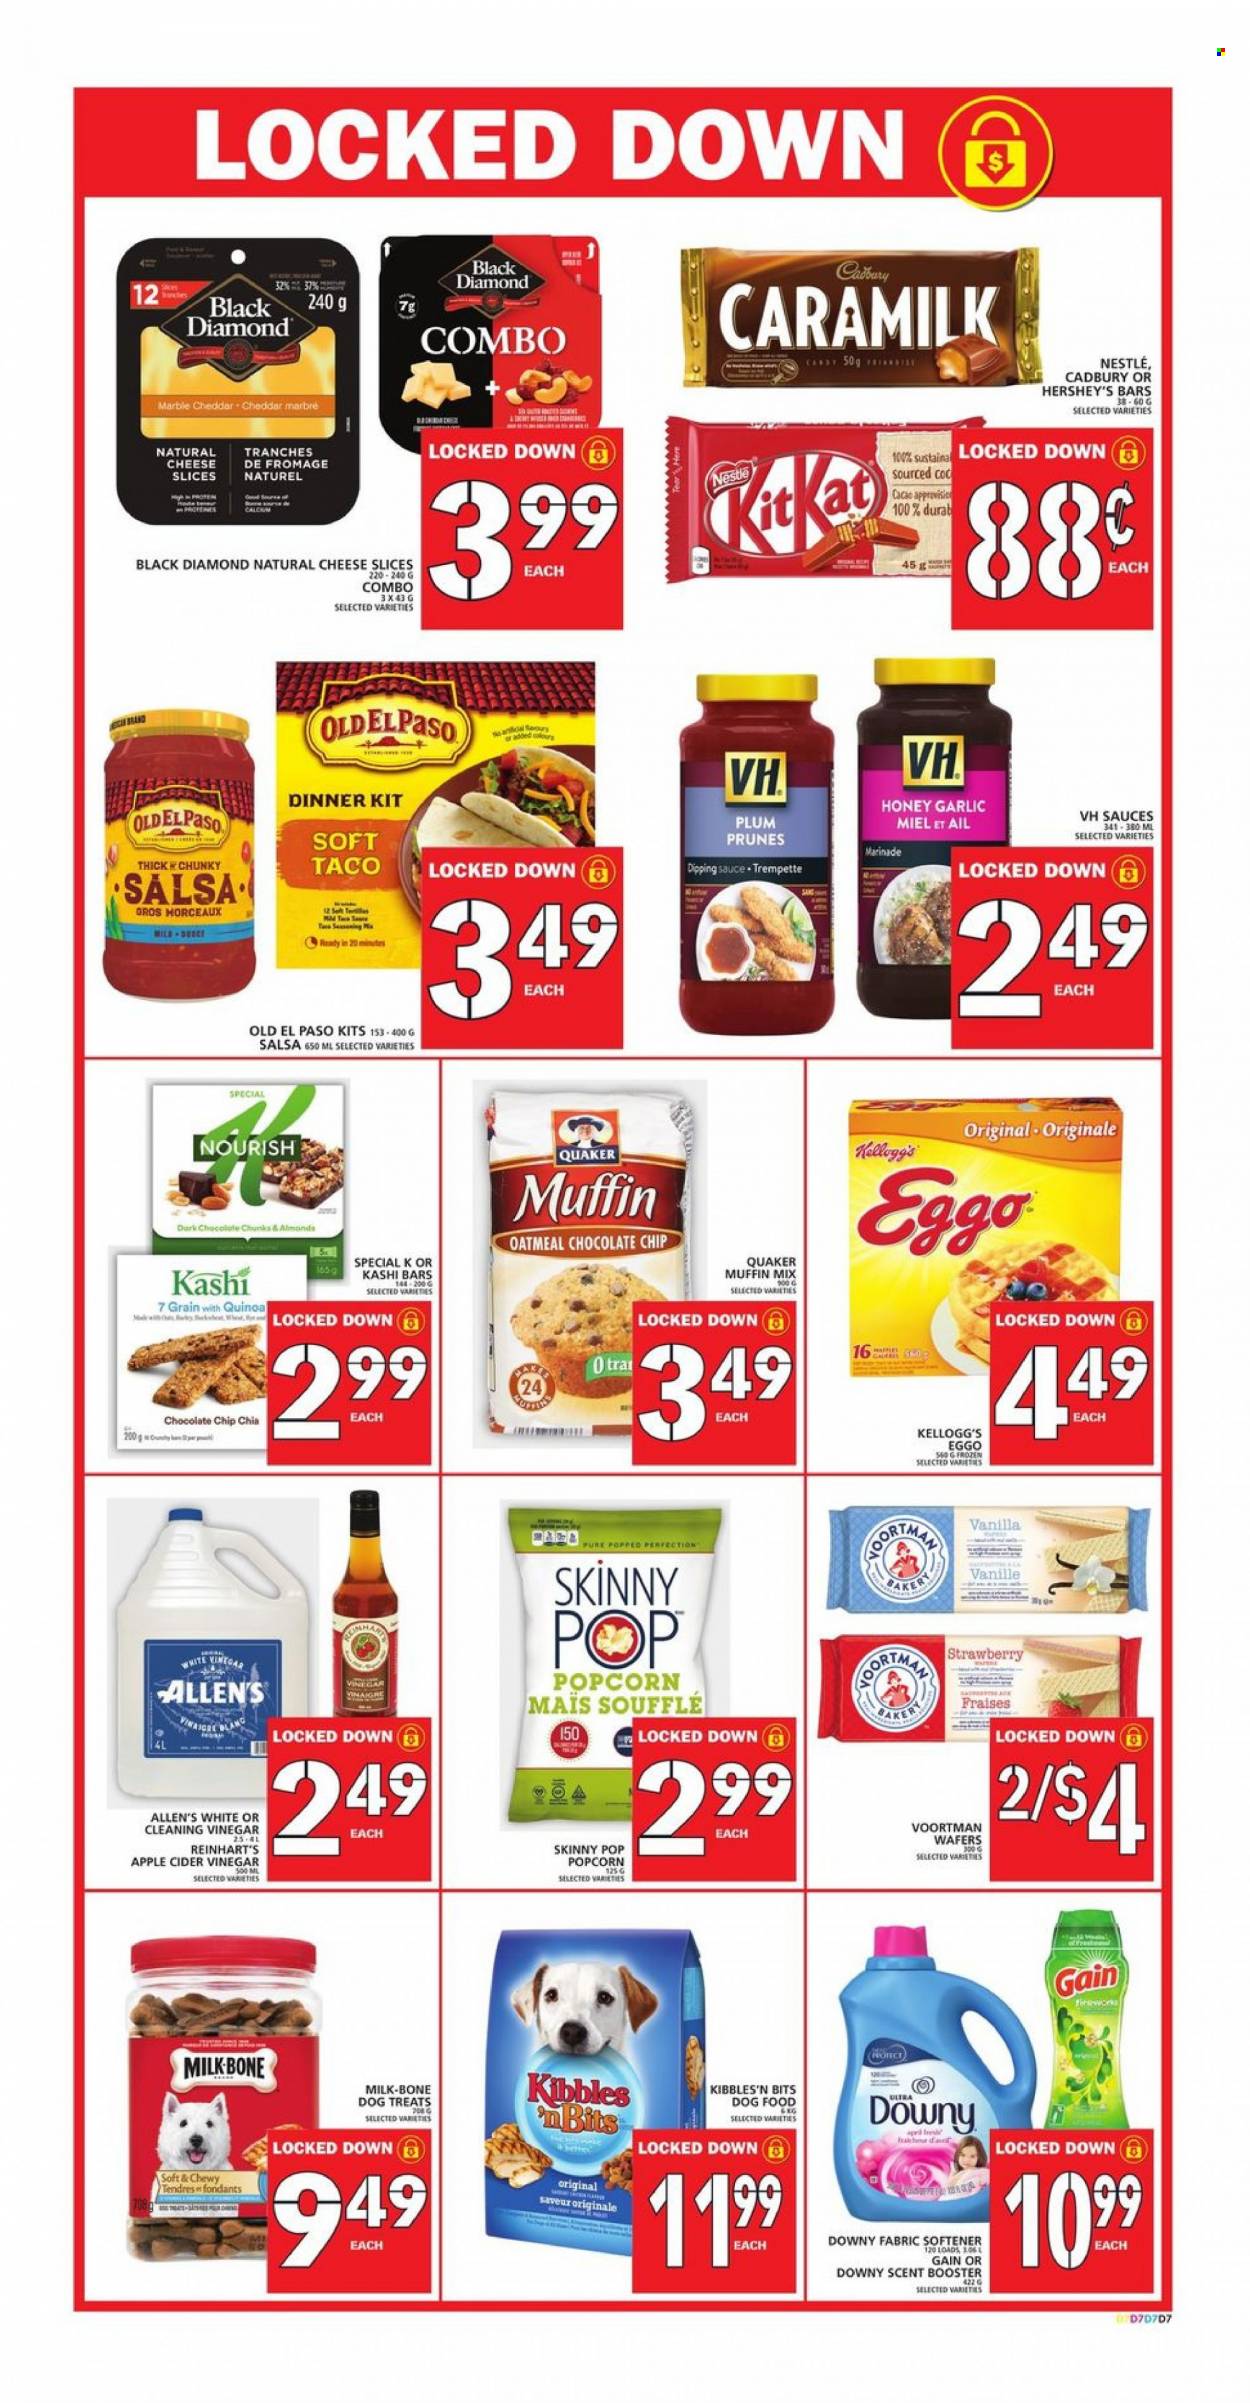 thumbnail - Food Basics Flyer - October 14, 2021 - October 20, 2021 - Sales products - pie, Old El Paso, muffin mix, garlic, dinner kit, Quaker, sliced cheese, cheddar, cheese, milk, Hershey's, wafers, chocolate chips, Kellogg's, Cadbury, popcorn, Skinny Pop, oatmeal, salsa, marinade, apple cider vinegar, vinegar, honey, almonds, prunes, dried fruit, Gain, fabric softener, Downy Laundry, animal food, dog food, Nestlé, quinoa. Page 10.